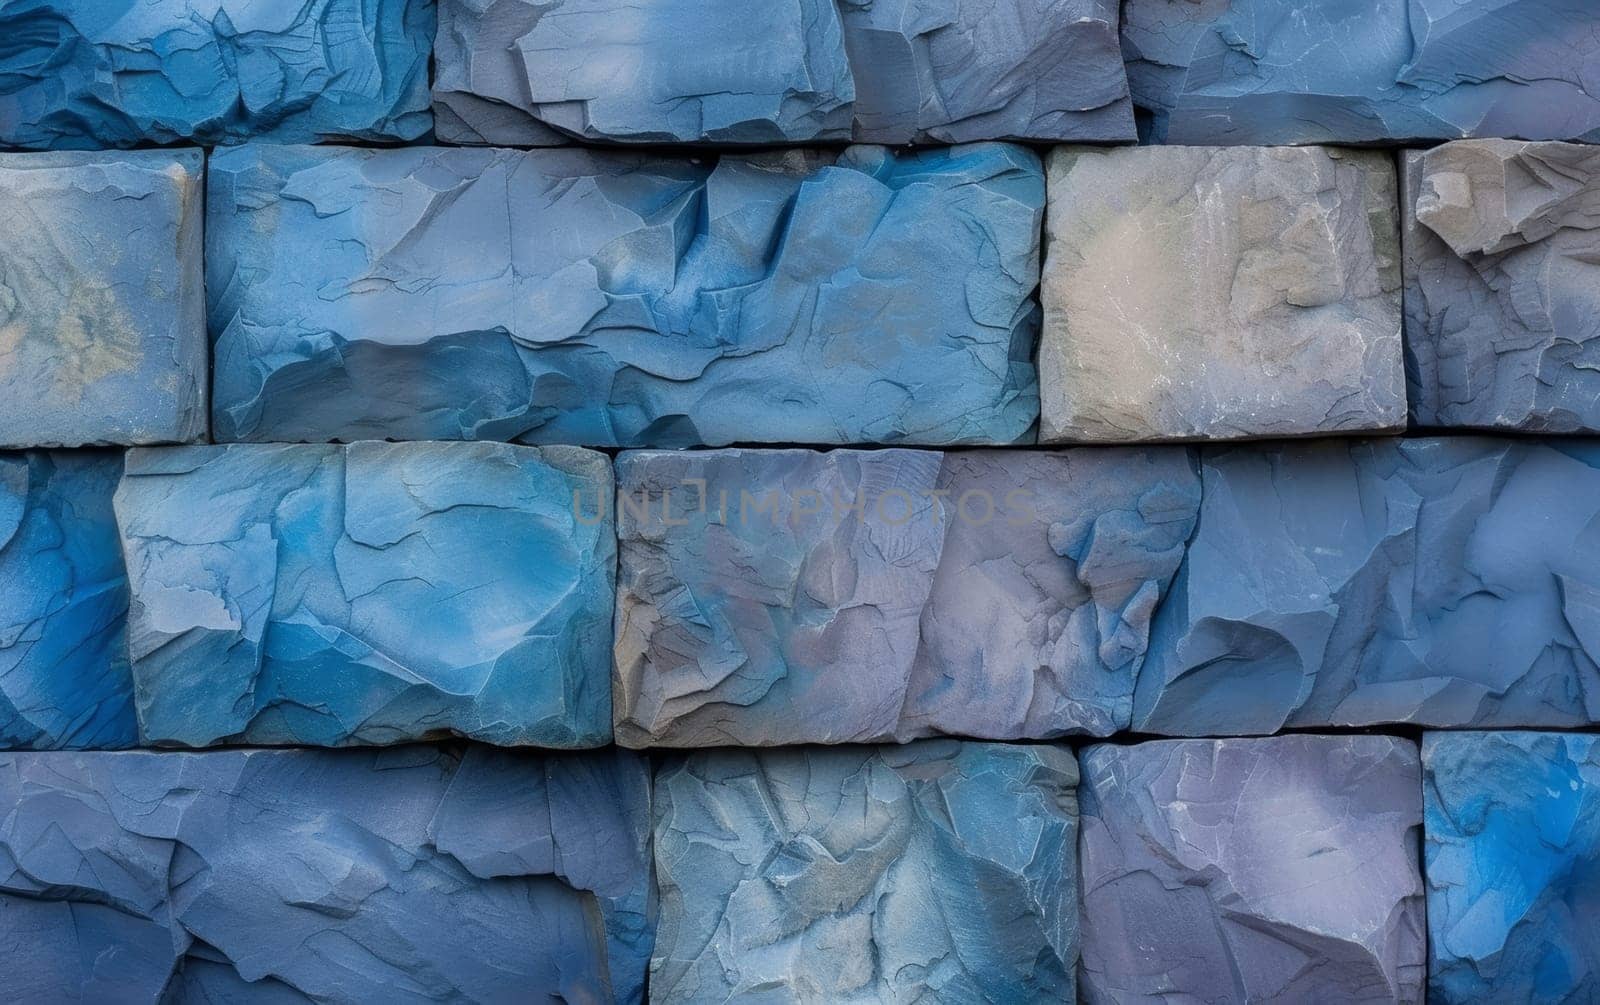 Close-up view of a wall made of irregularly shaped stones in various shades of blue. by sfinks